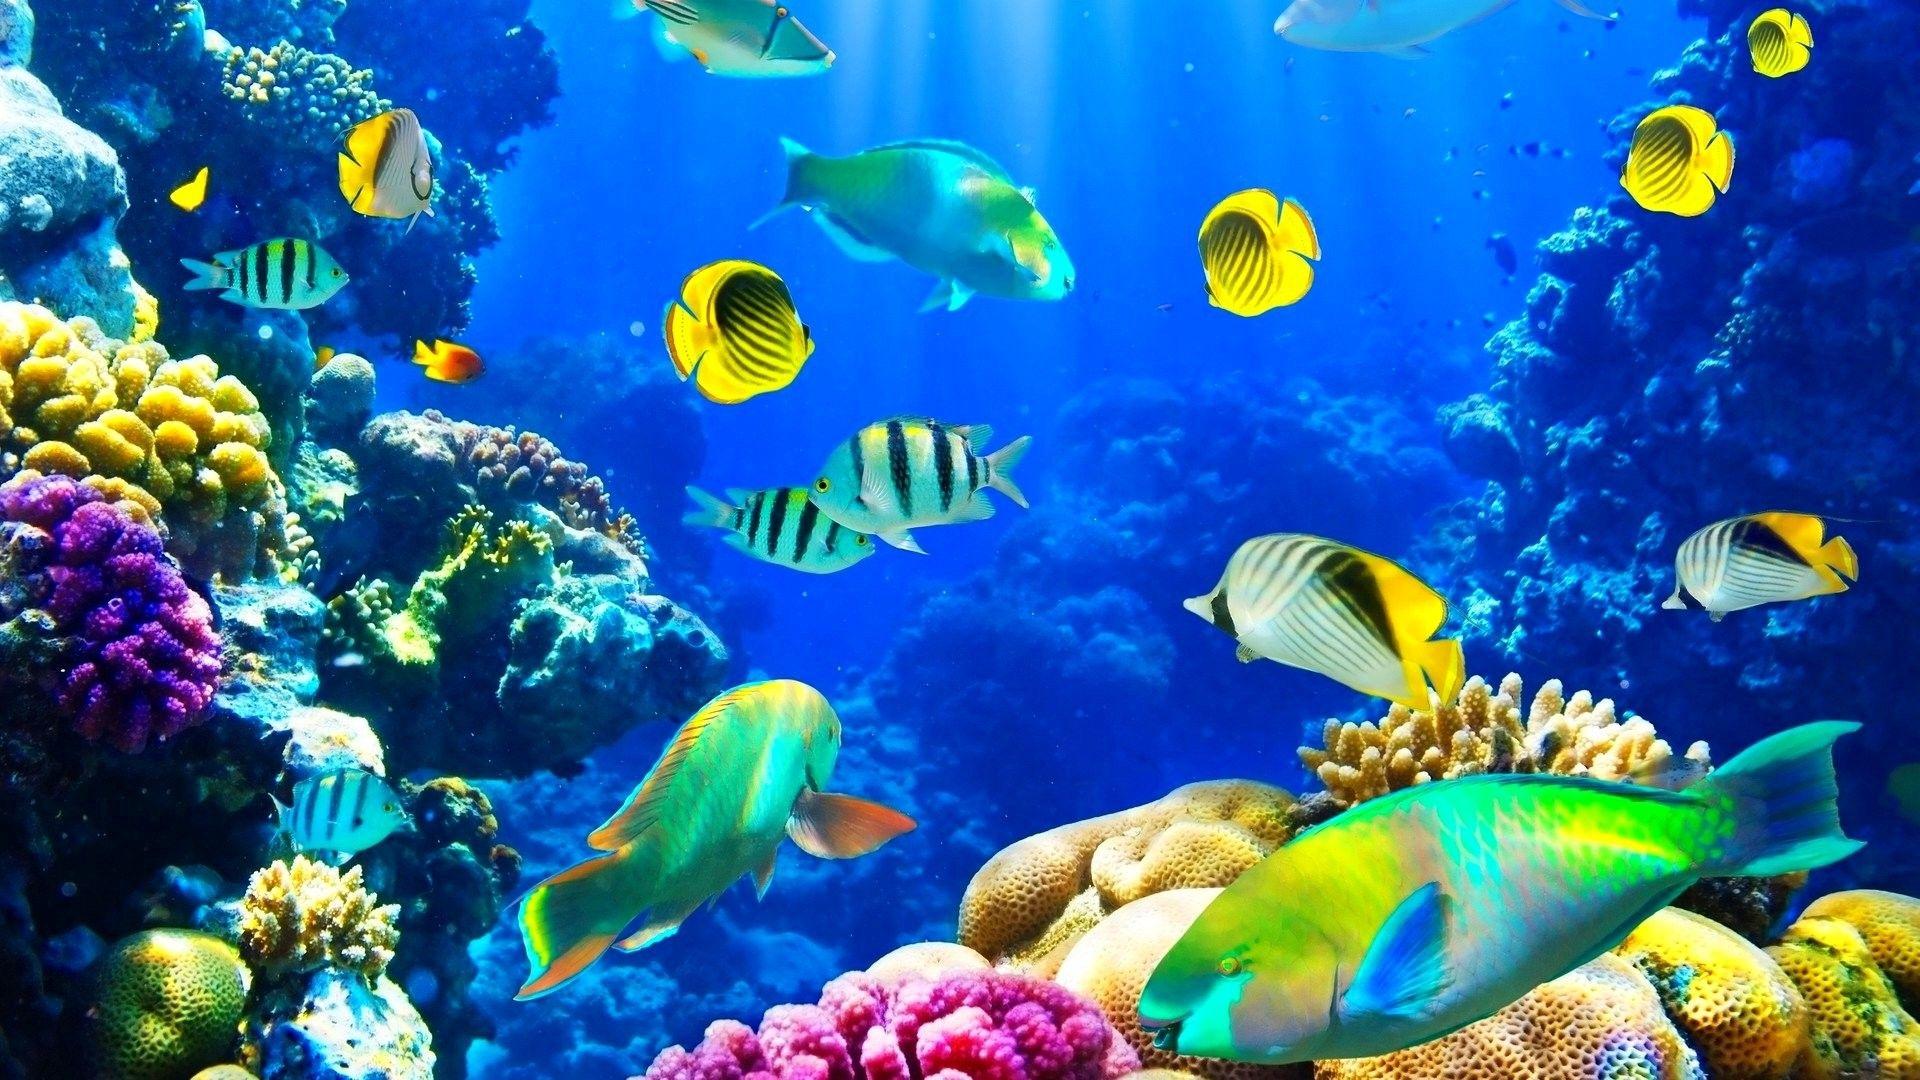 Fishes: Ocean Fishes Nature Sea Sealife Underwater Fish Freshwater